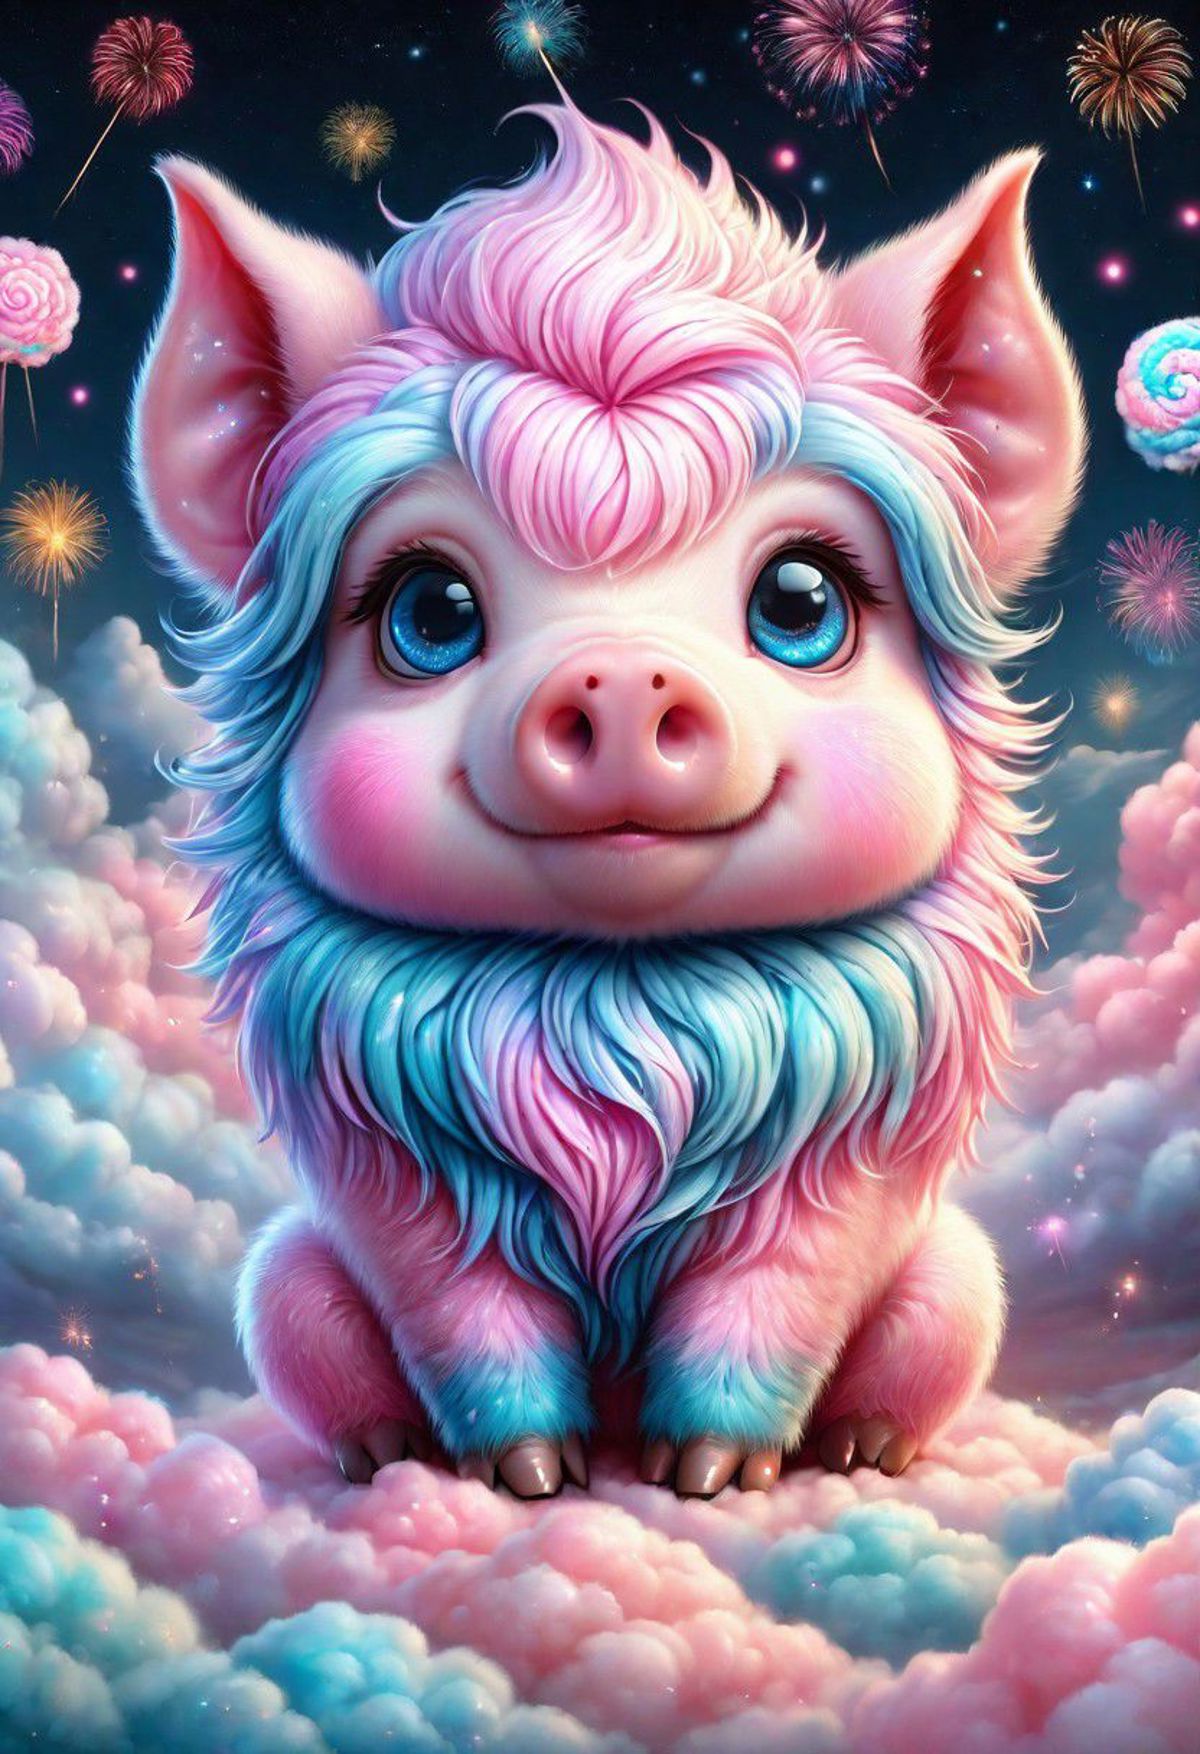 A pink and blue unicorn with a rainbow mane sitting on a cloud.